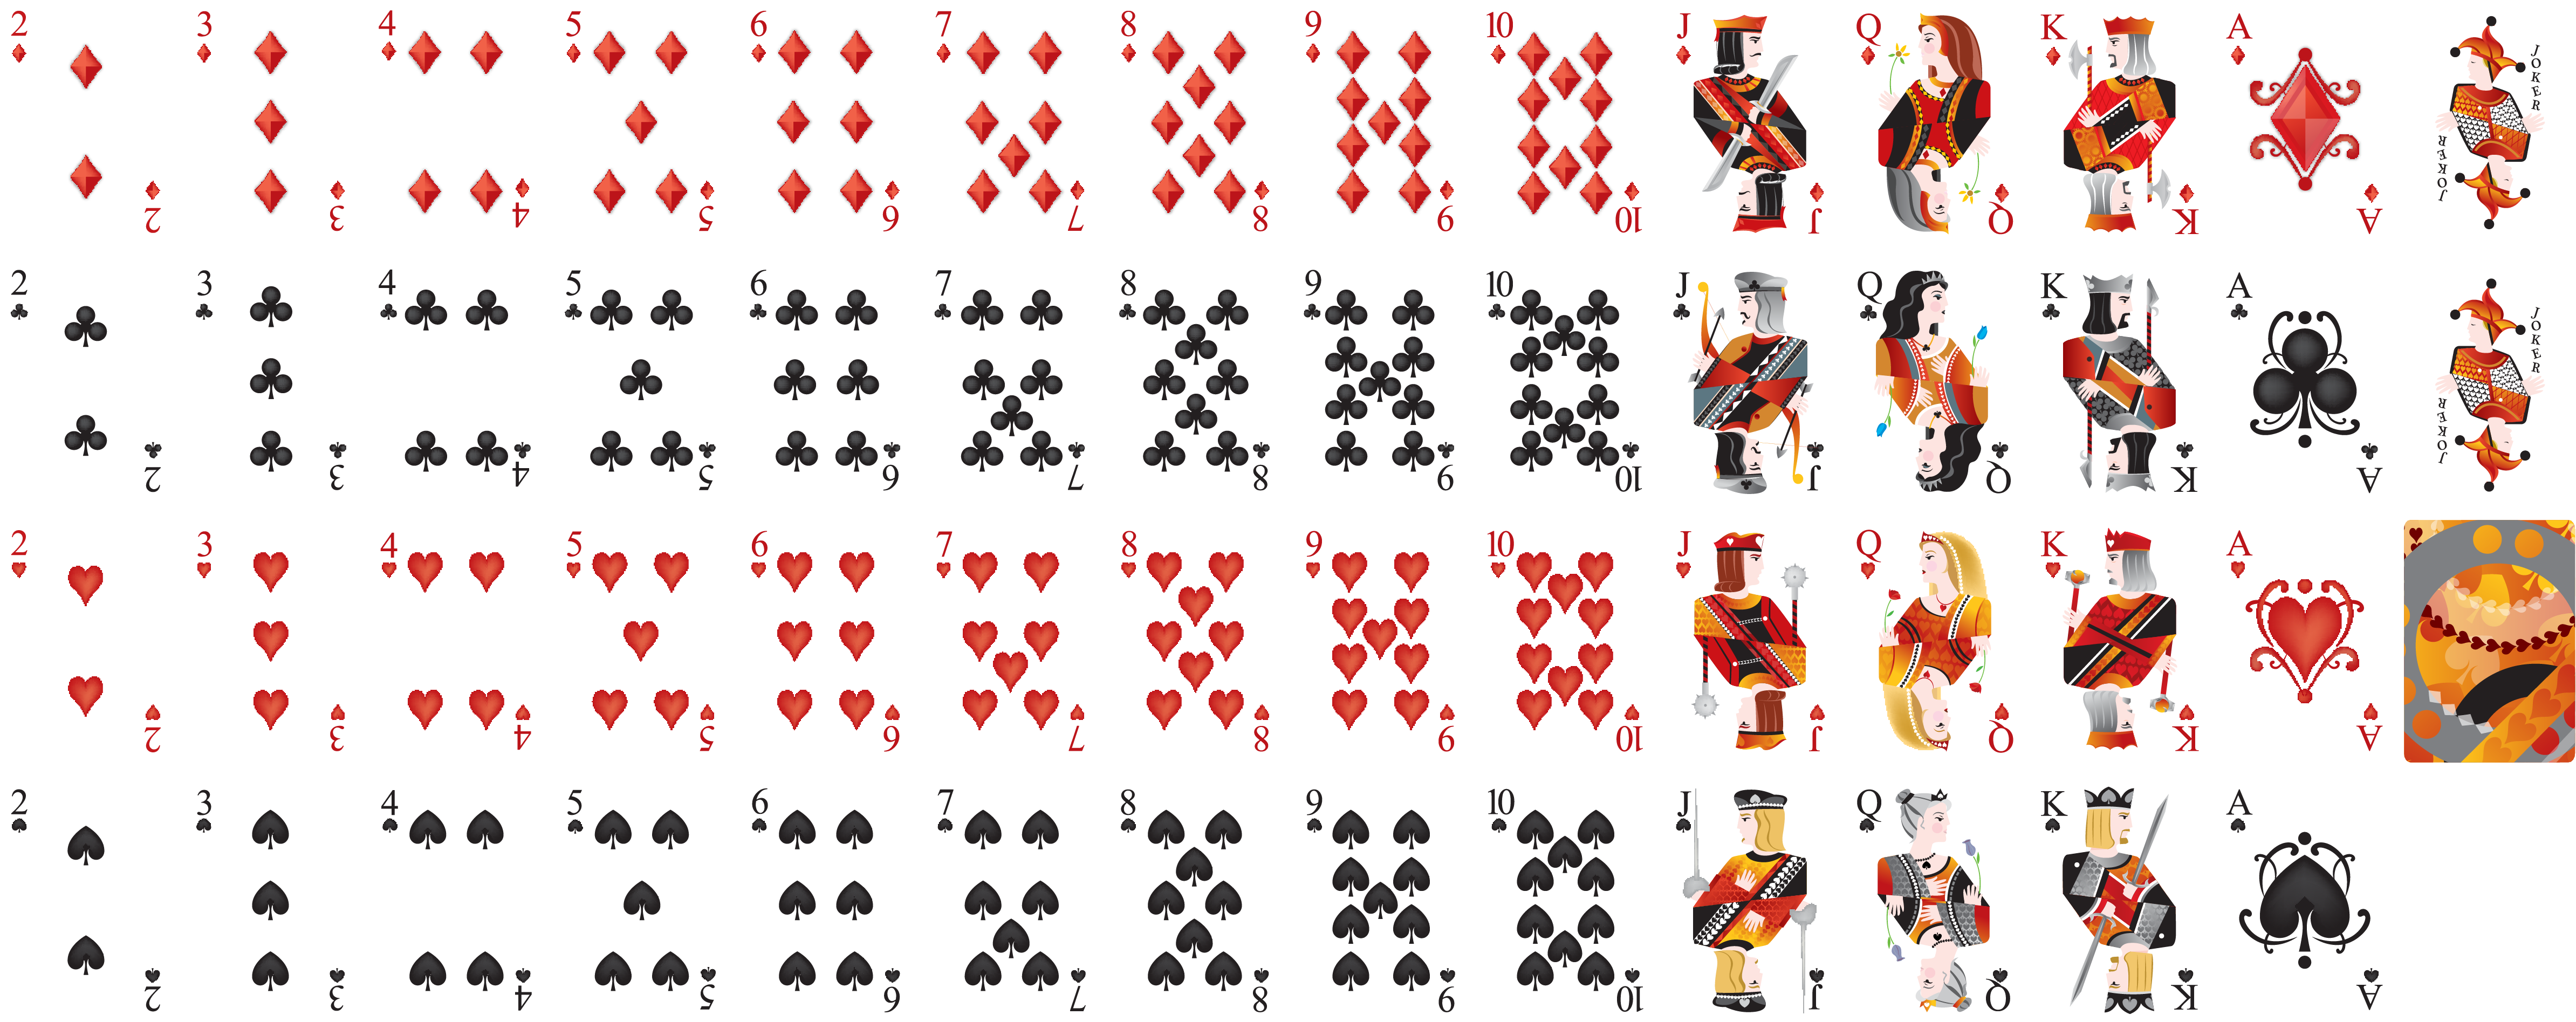 Png Image With Transparent Background Poker Card Vector